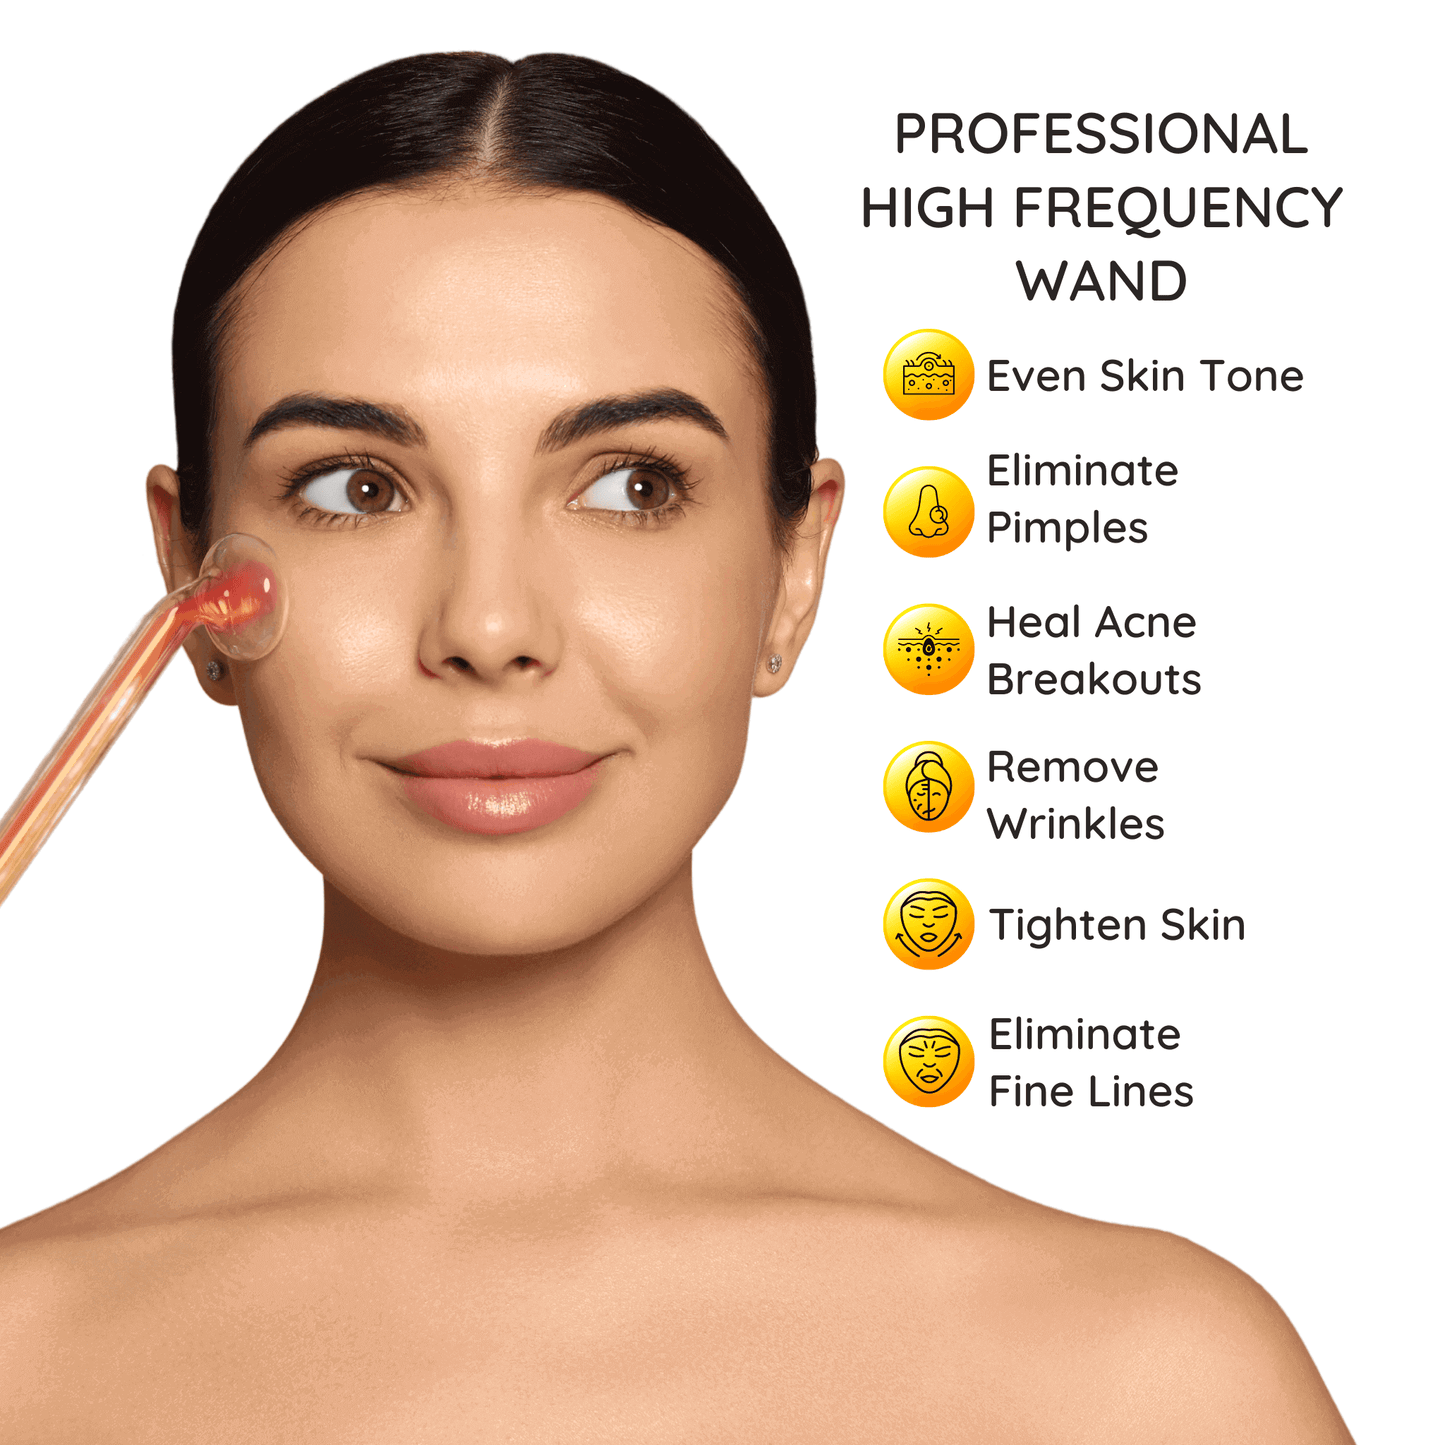 smiling woman beside a list of six benefits of the high frequency wand